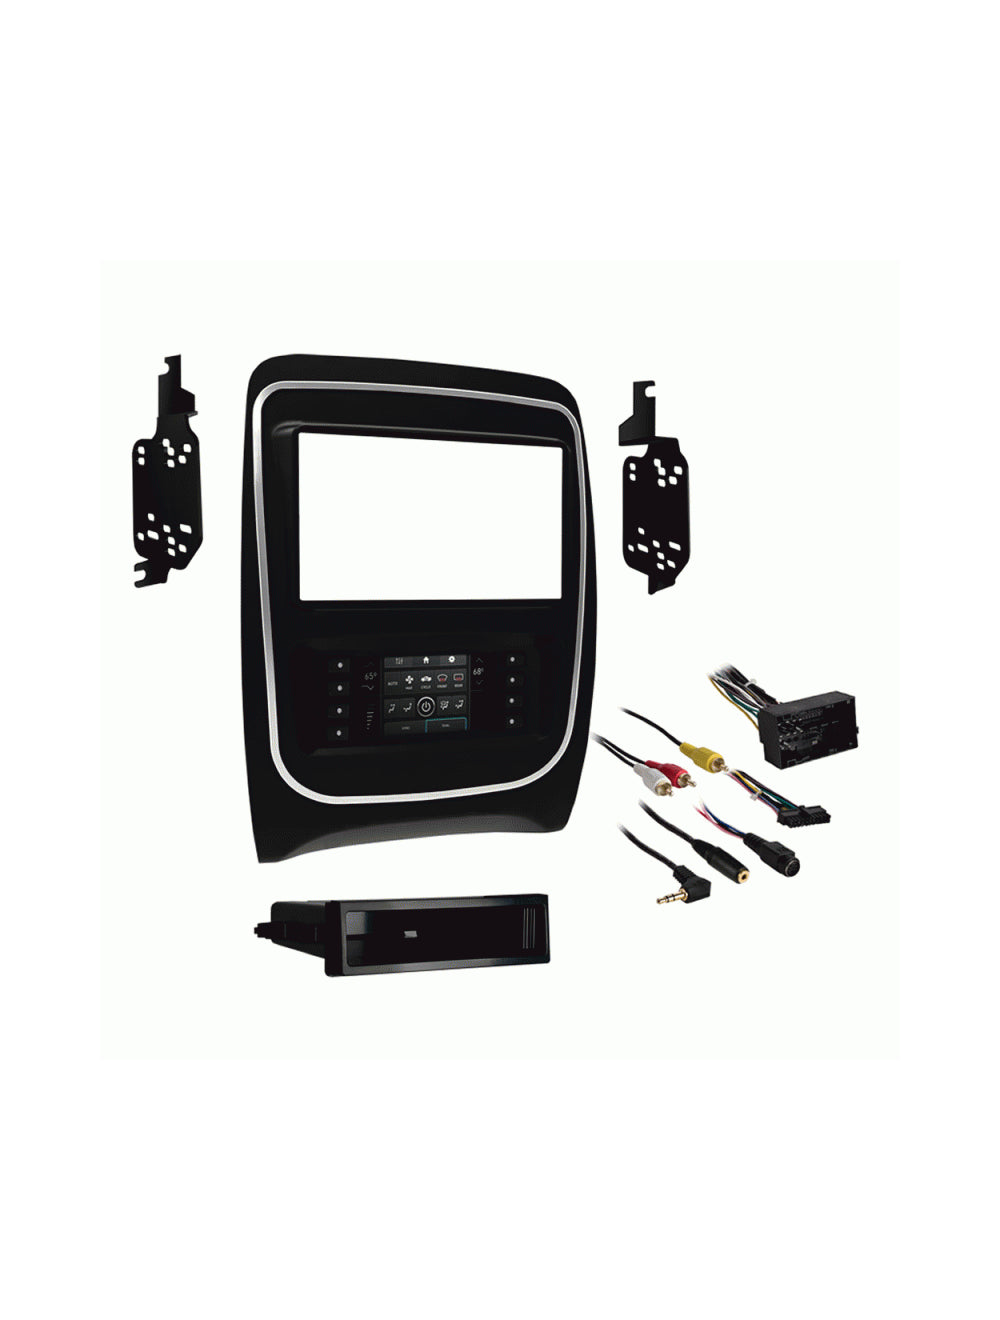 Metra 99-6537B Turbo Touch Premium Dash Kit with Integrated Touch Screen For 2014-Up Dodge Durango